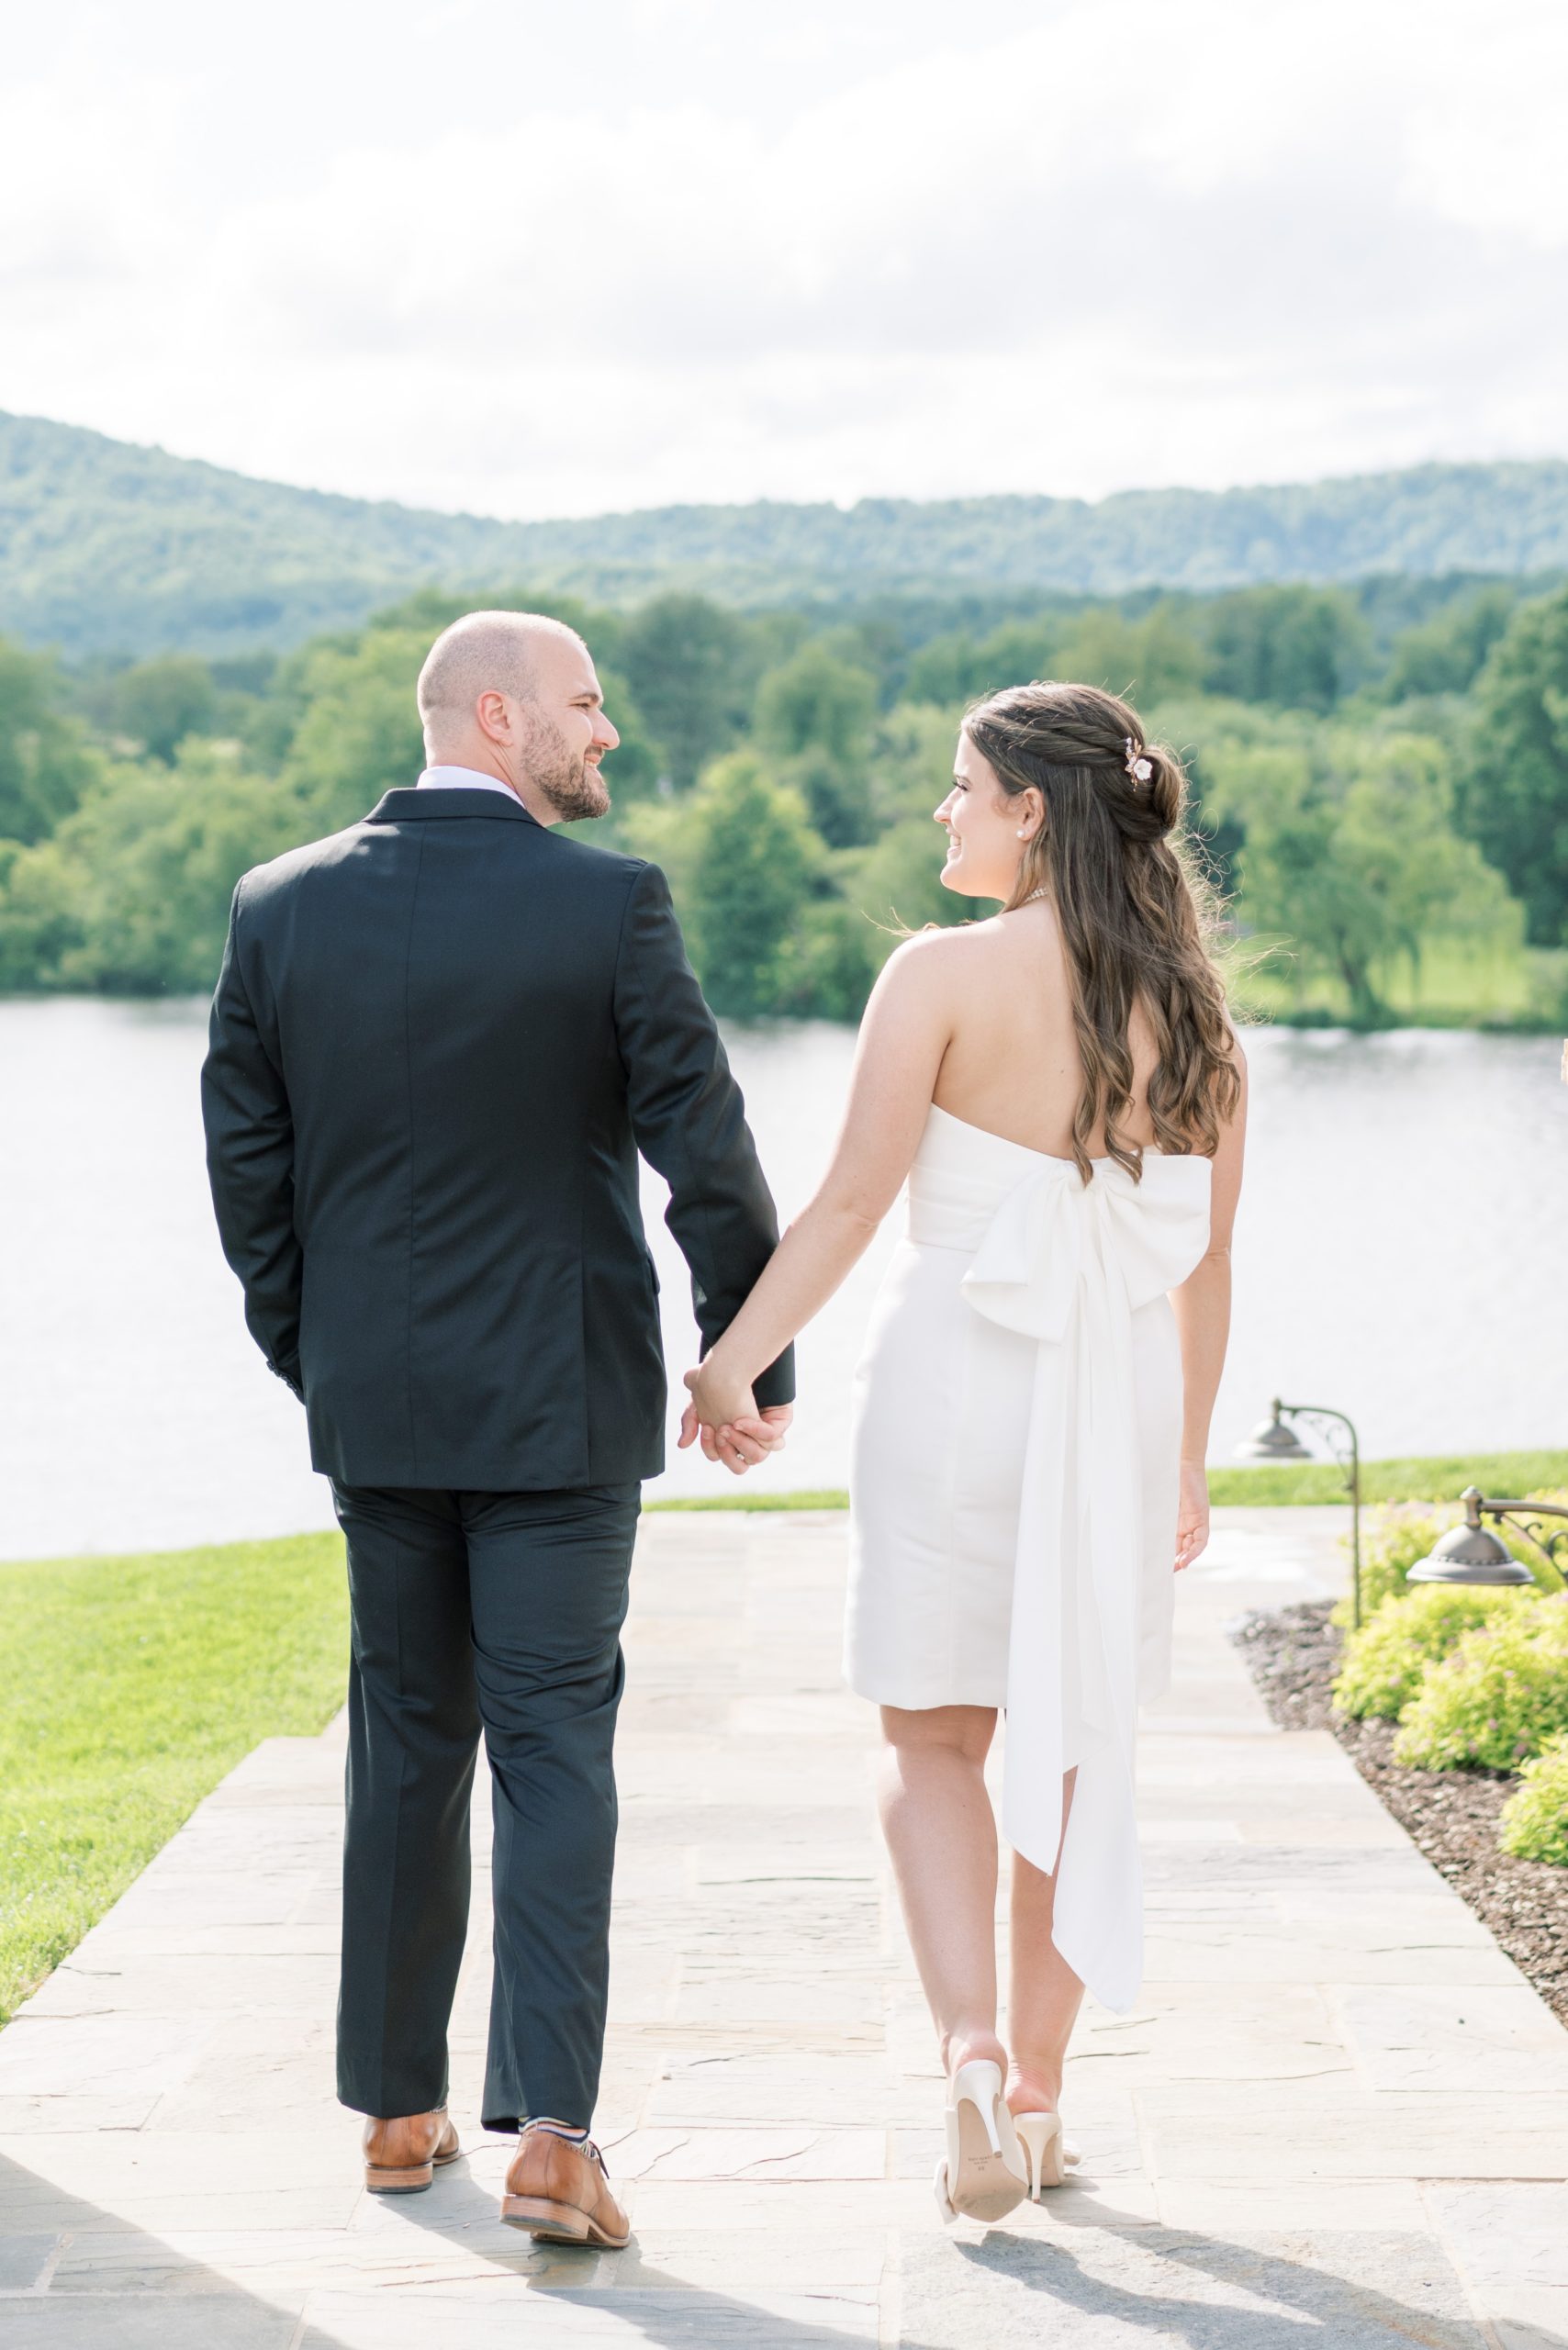 A Casino Night & Rehearsal Dinner recap from a private estate wedding in The Plains, Virginia.